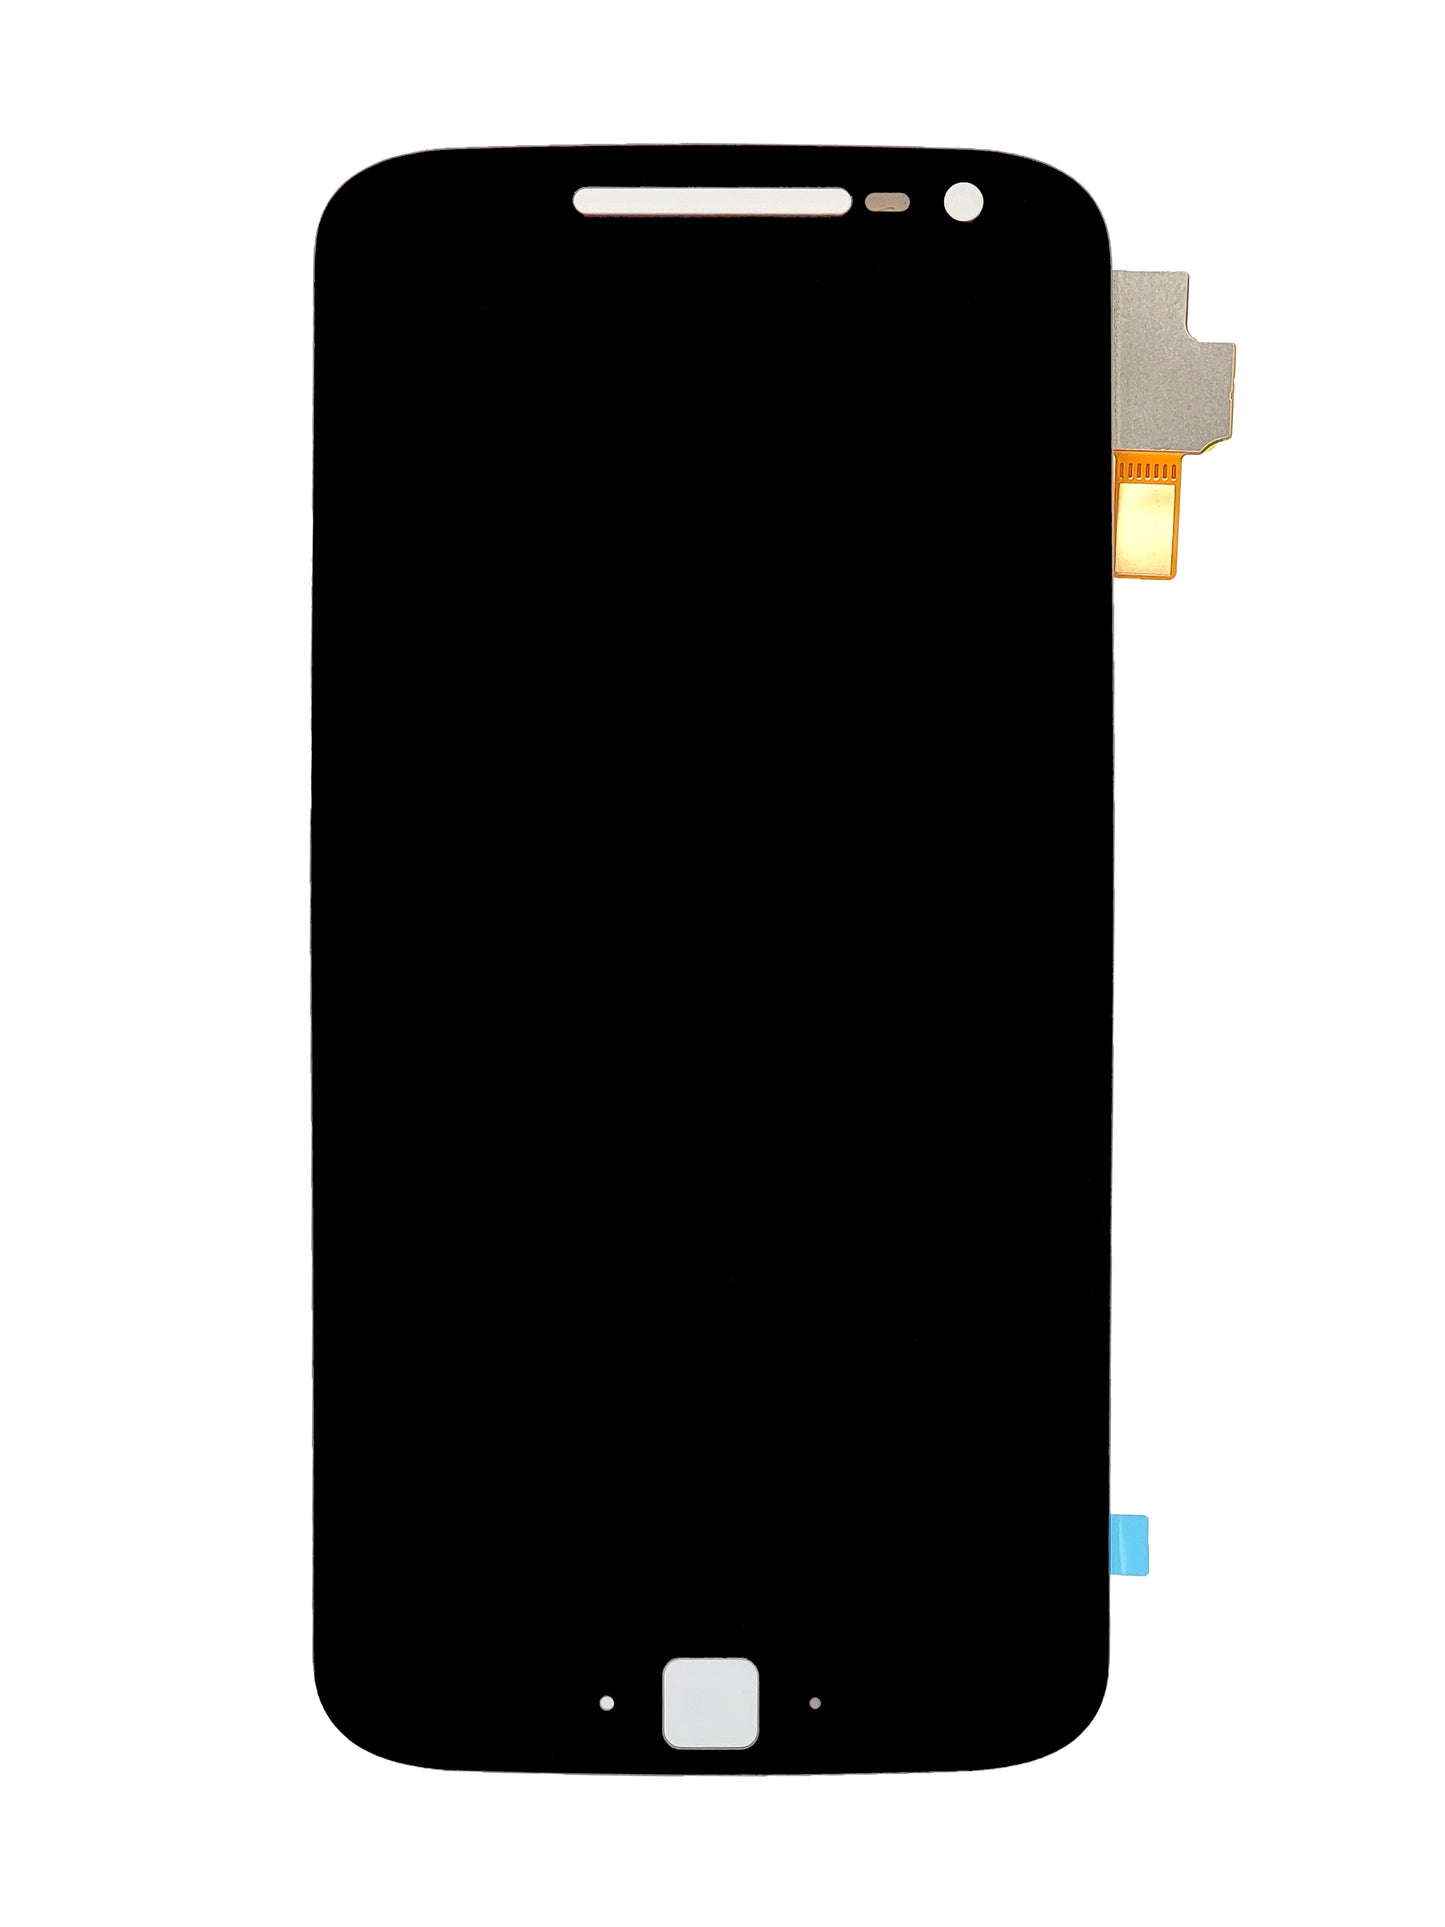 Moto G4 Plus (XT1641) Screen Assembly (Without The Frame) (Refurbished) (Black)